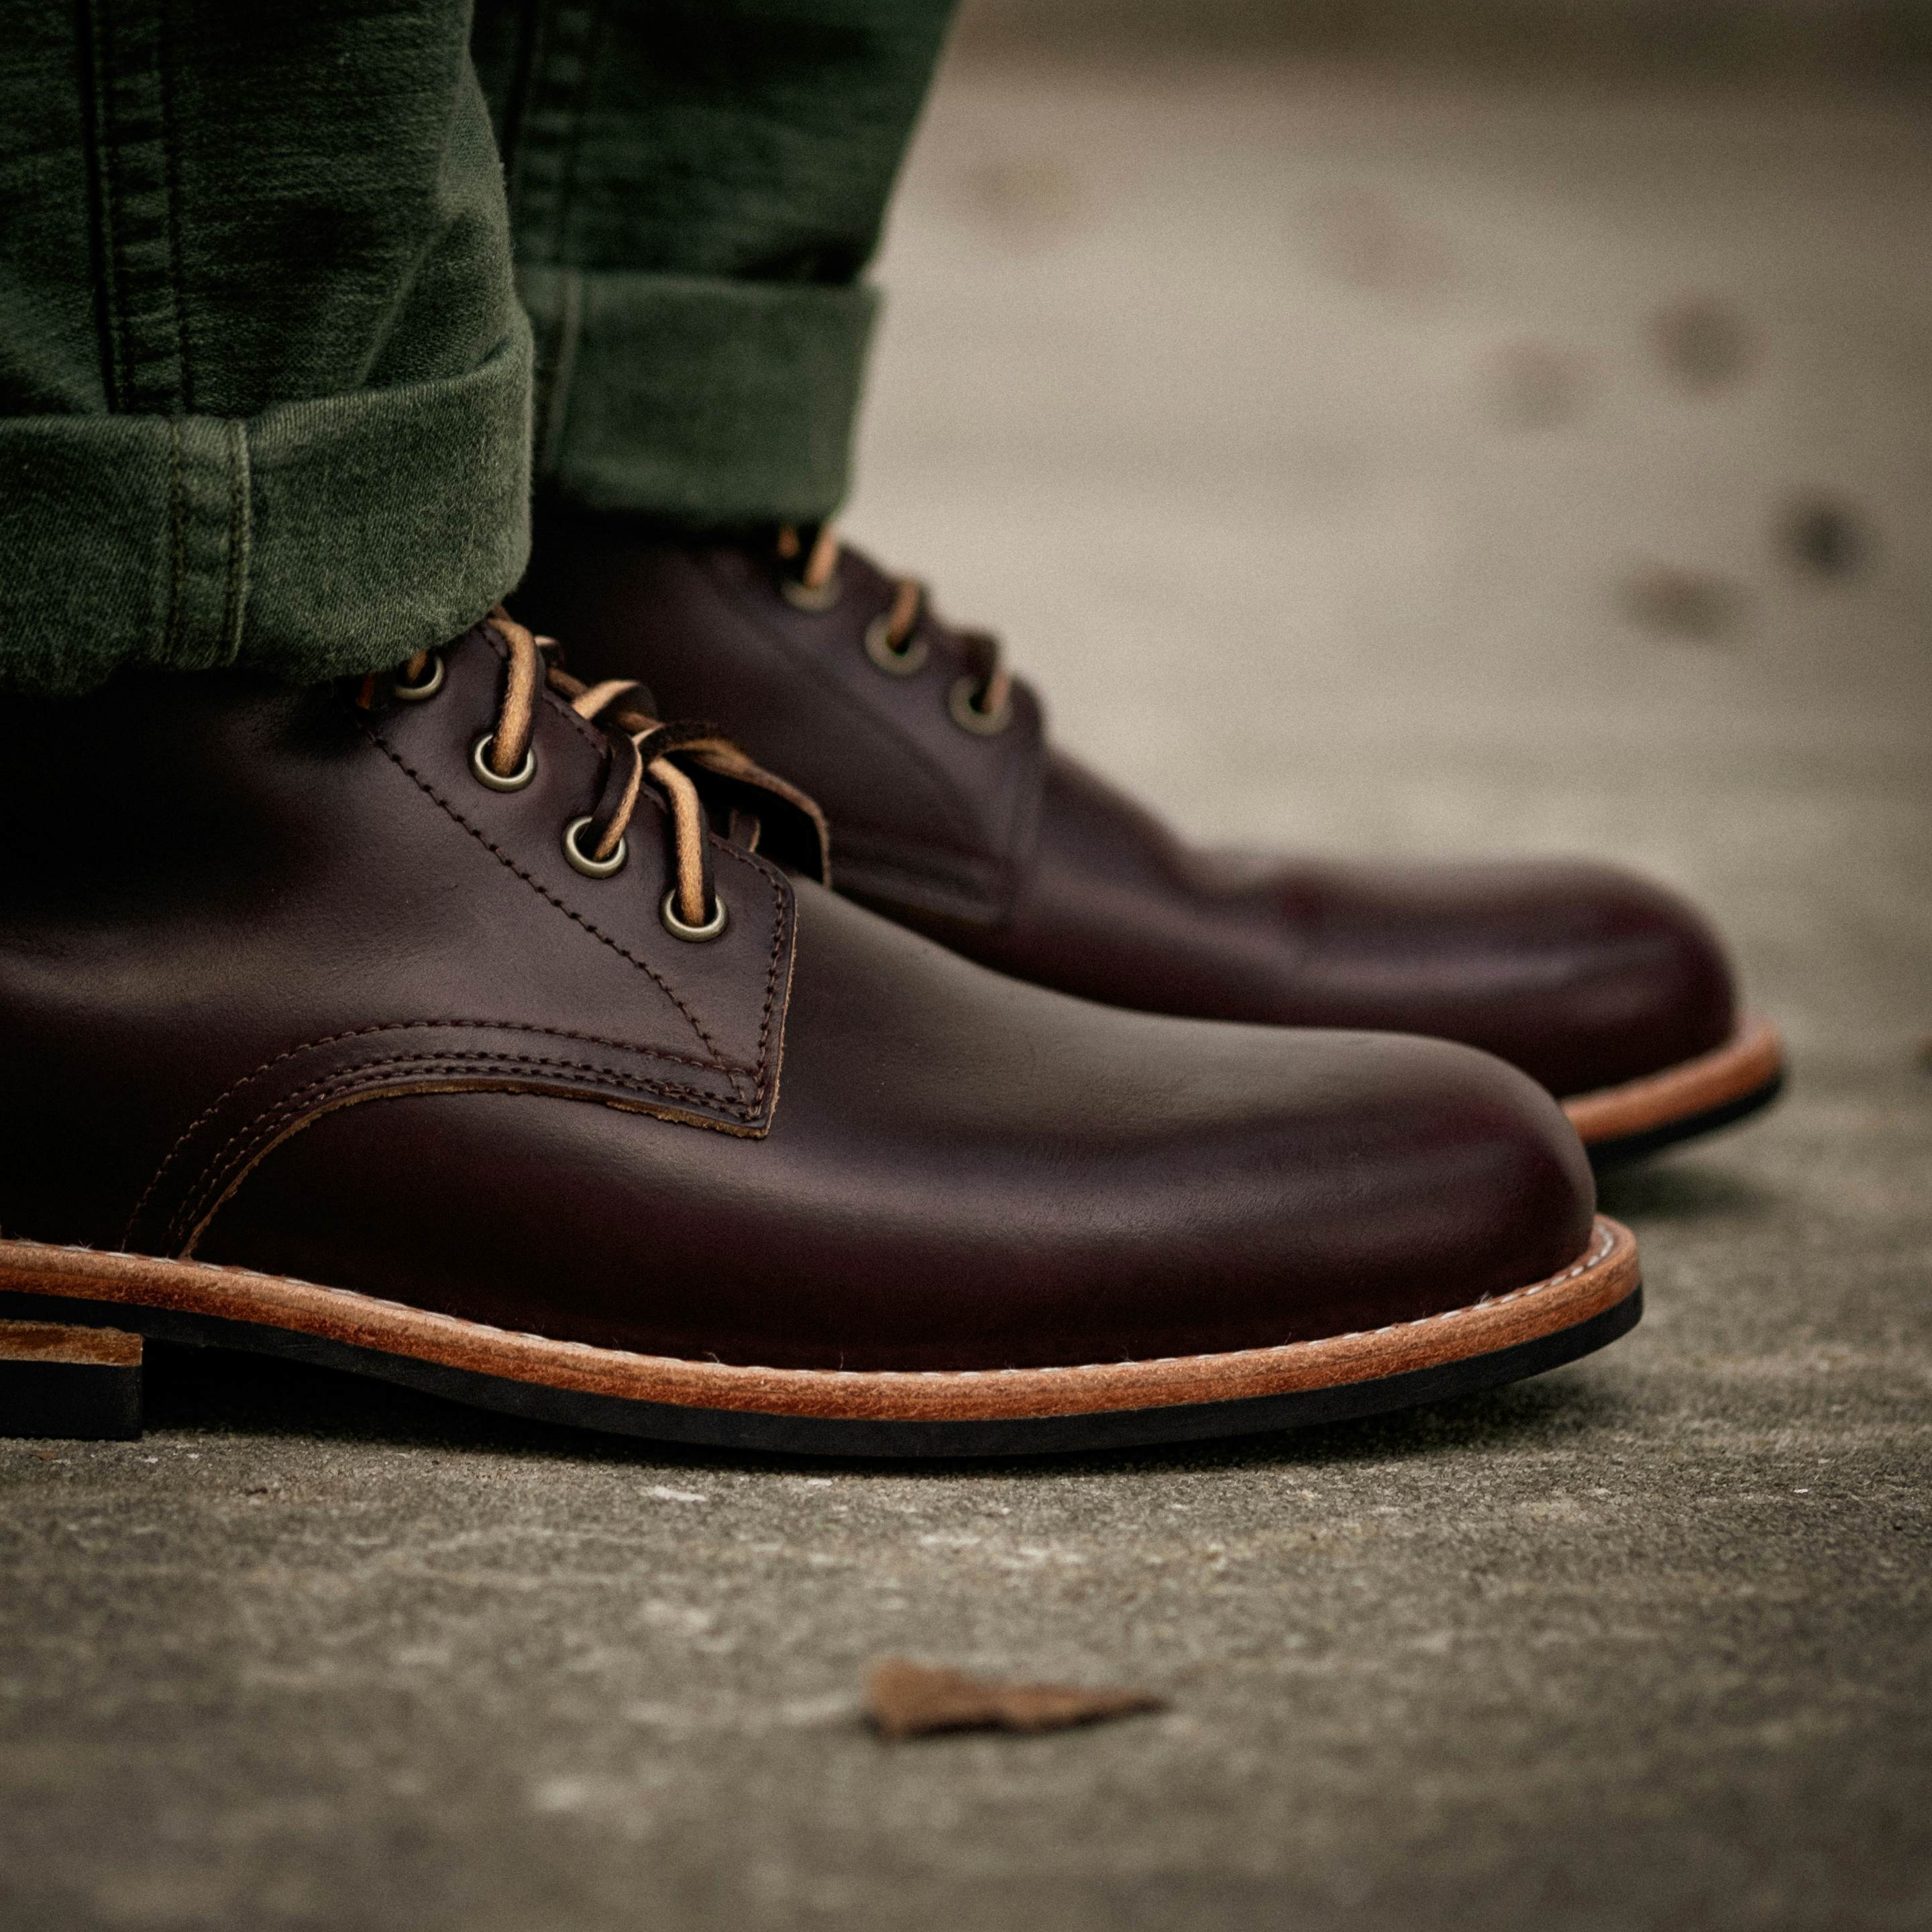 Trench Boot - Color 8 Chromexcel, Dainite Sole - Made in USA | Oak ...